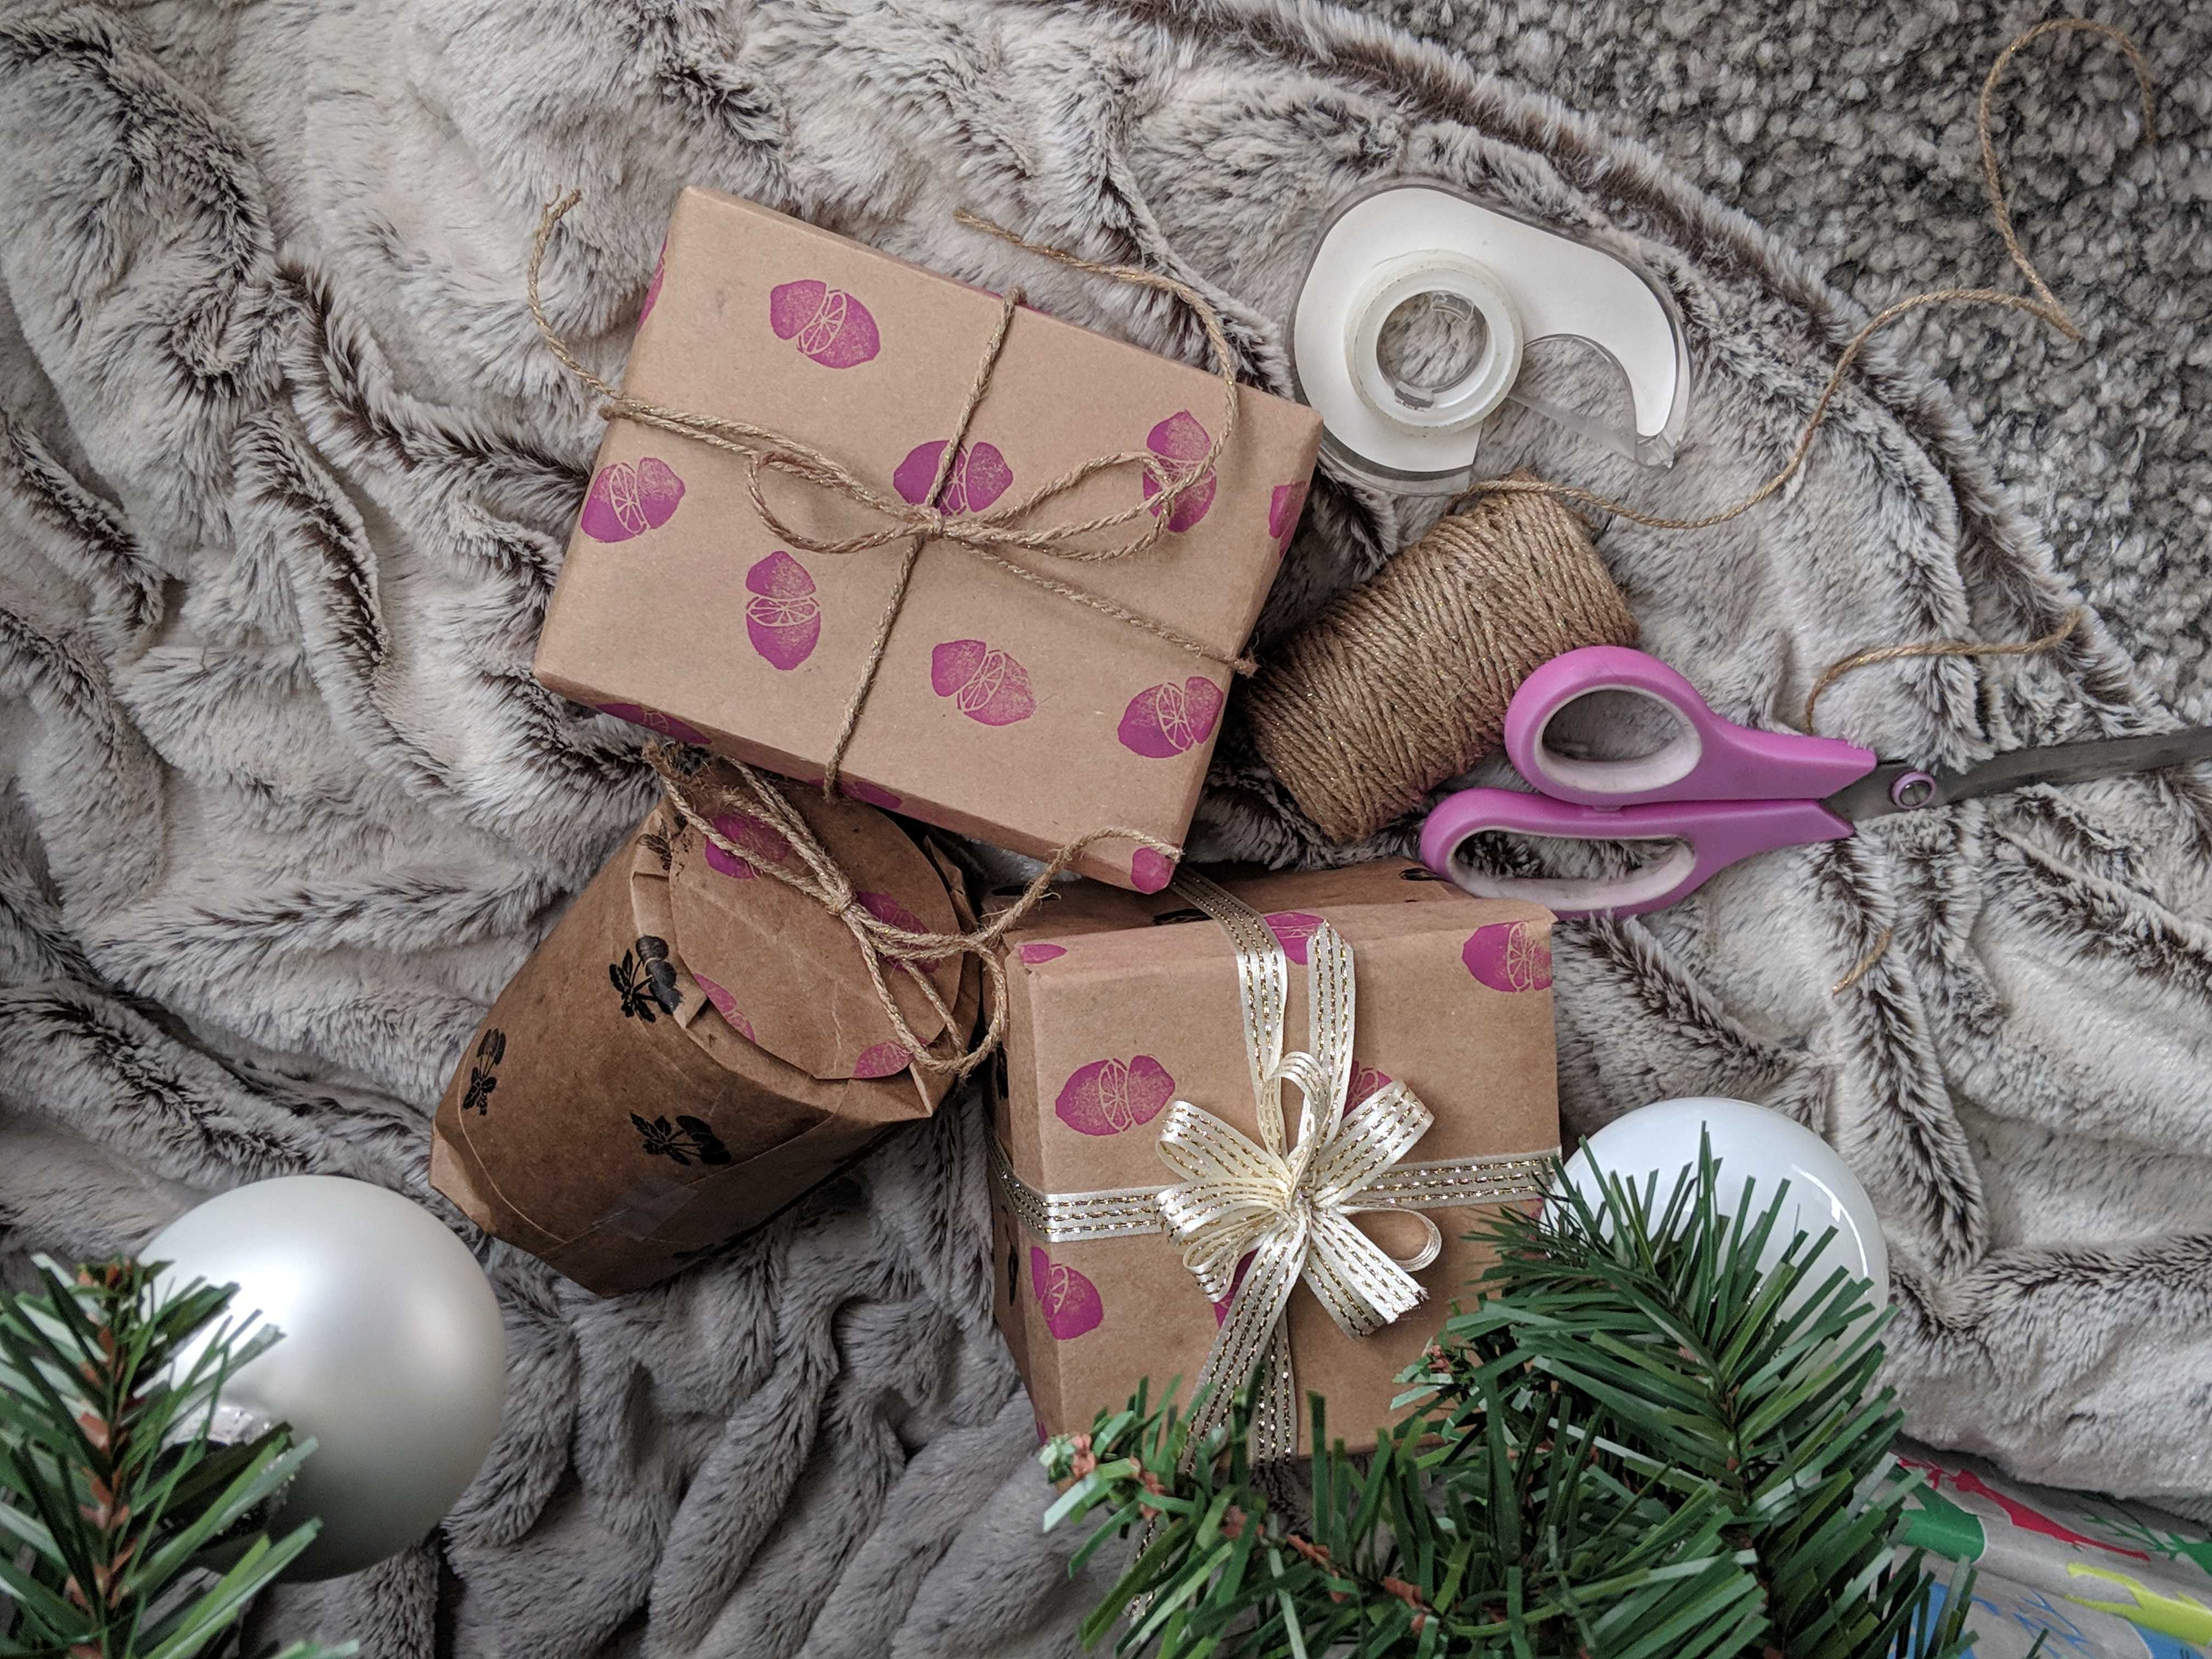 Christmas Aesthetic, Gift Wrapping, Gift Ideas